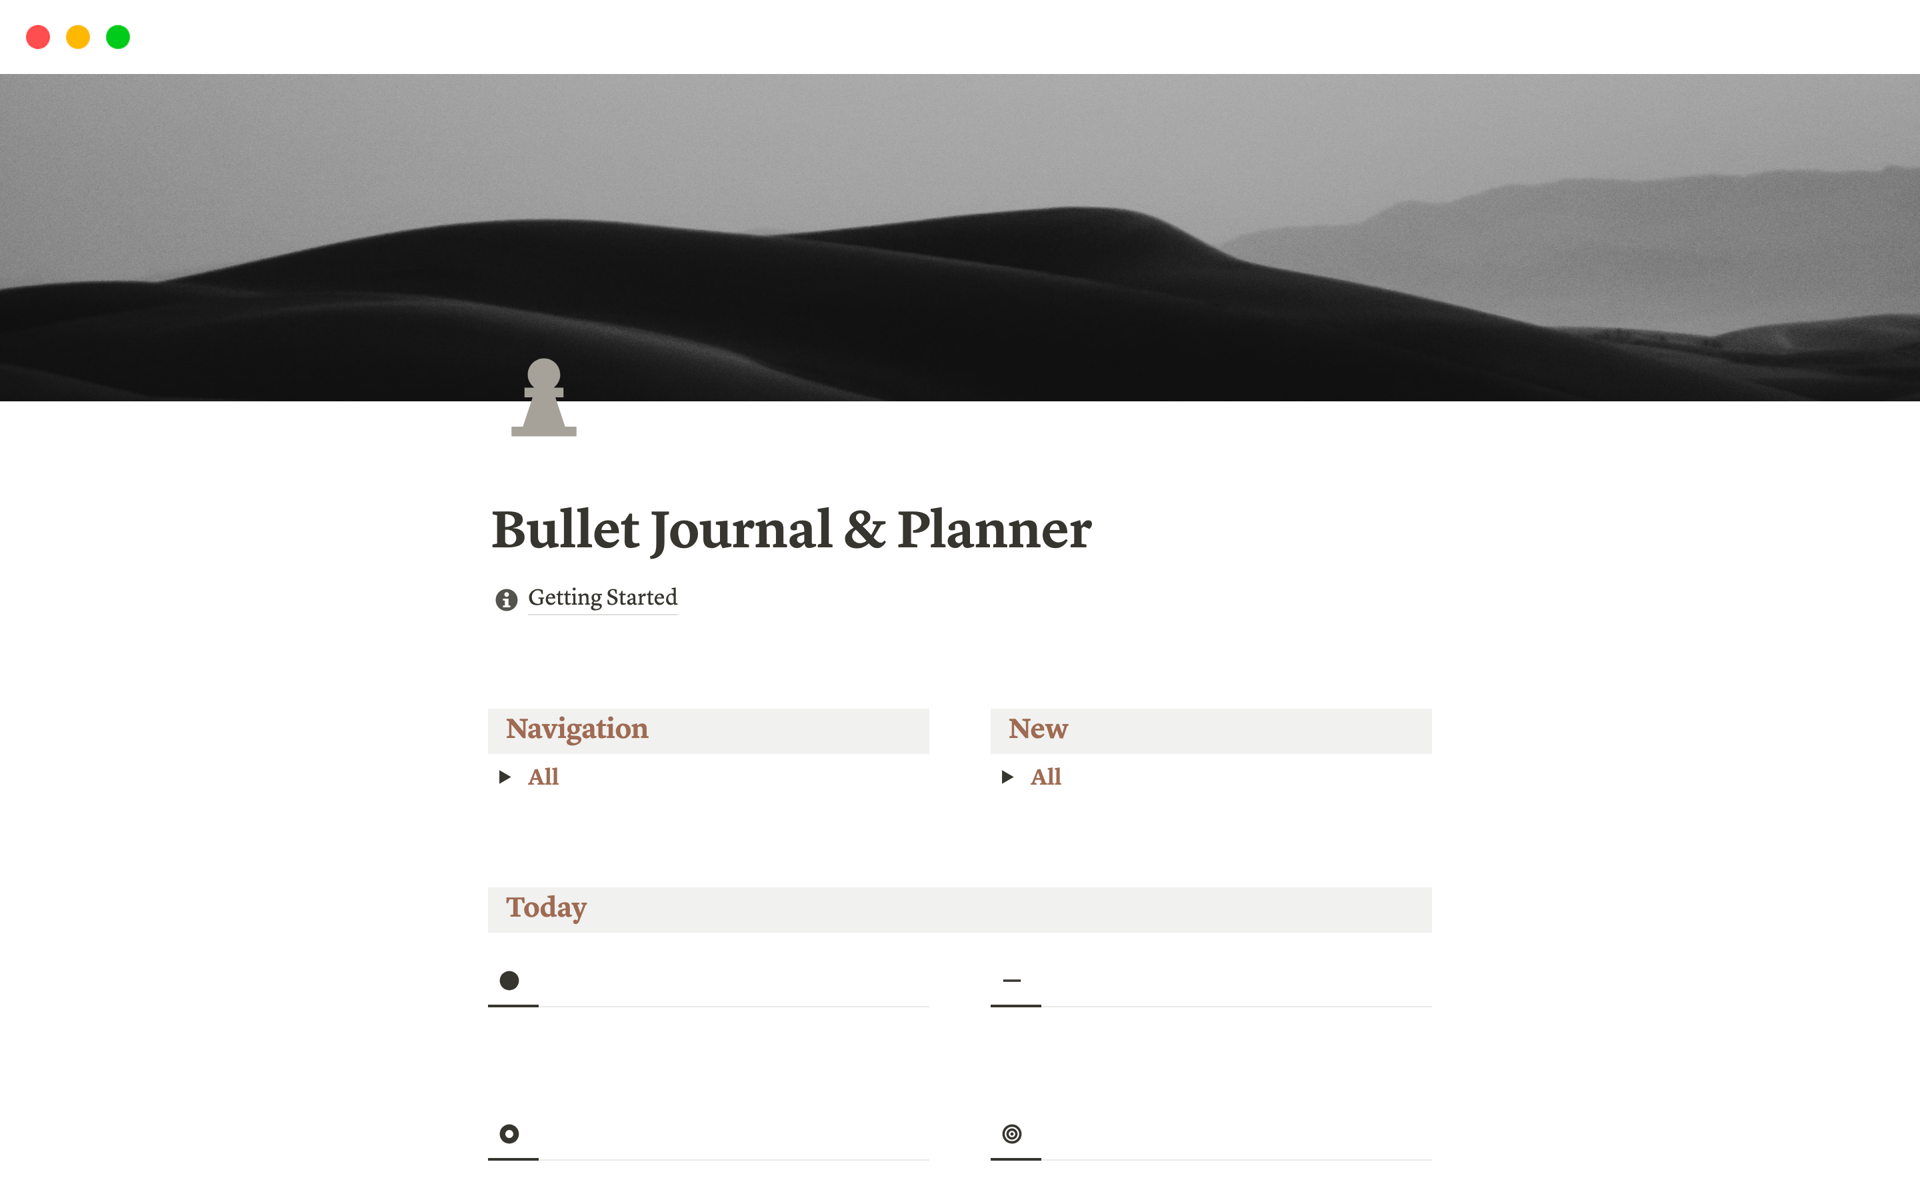 Daily, weekly, and monthly journaling, planning, and goal-setting, designed with a clean layout.